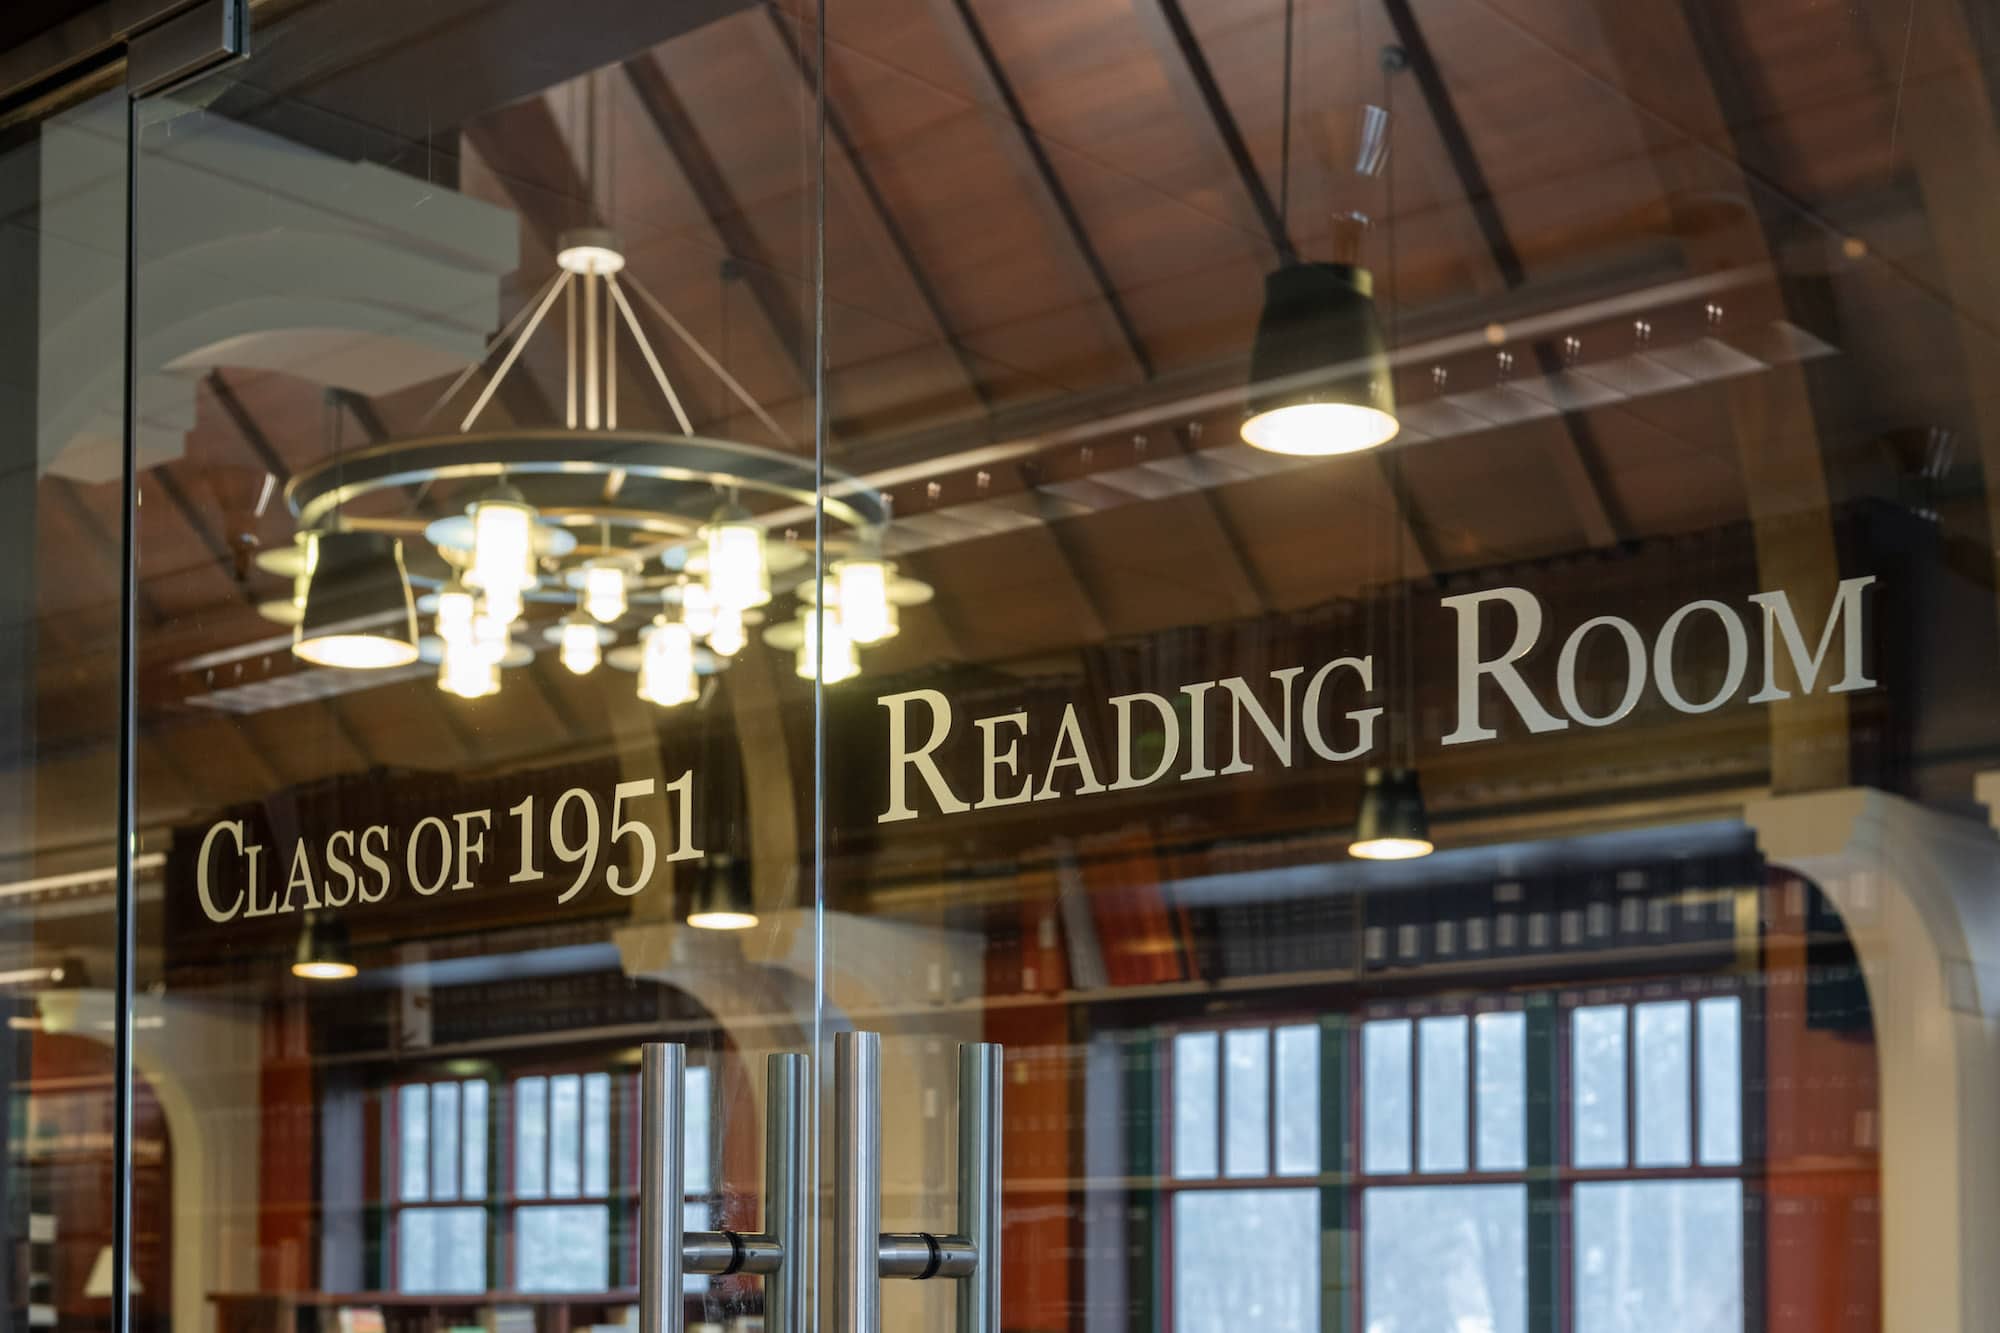 Interior view a room with a sign that reads Class of 1951 Reading Room in a black frame with large windows below it.